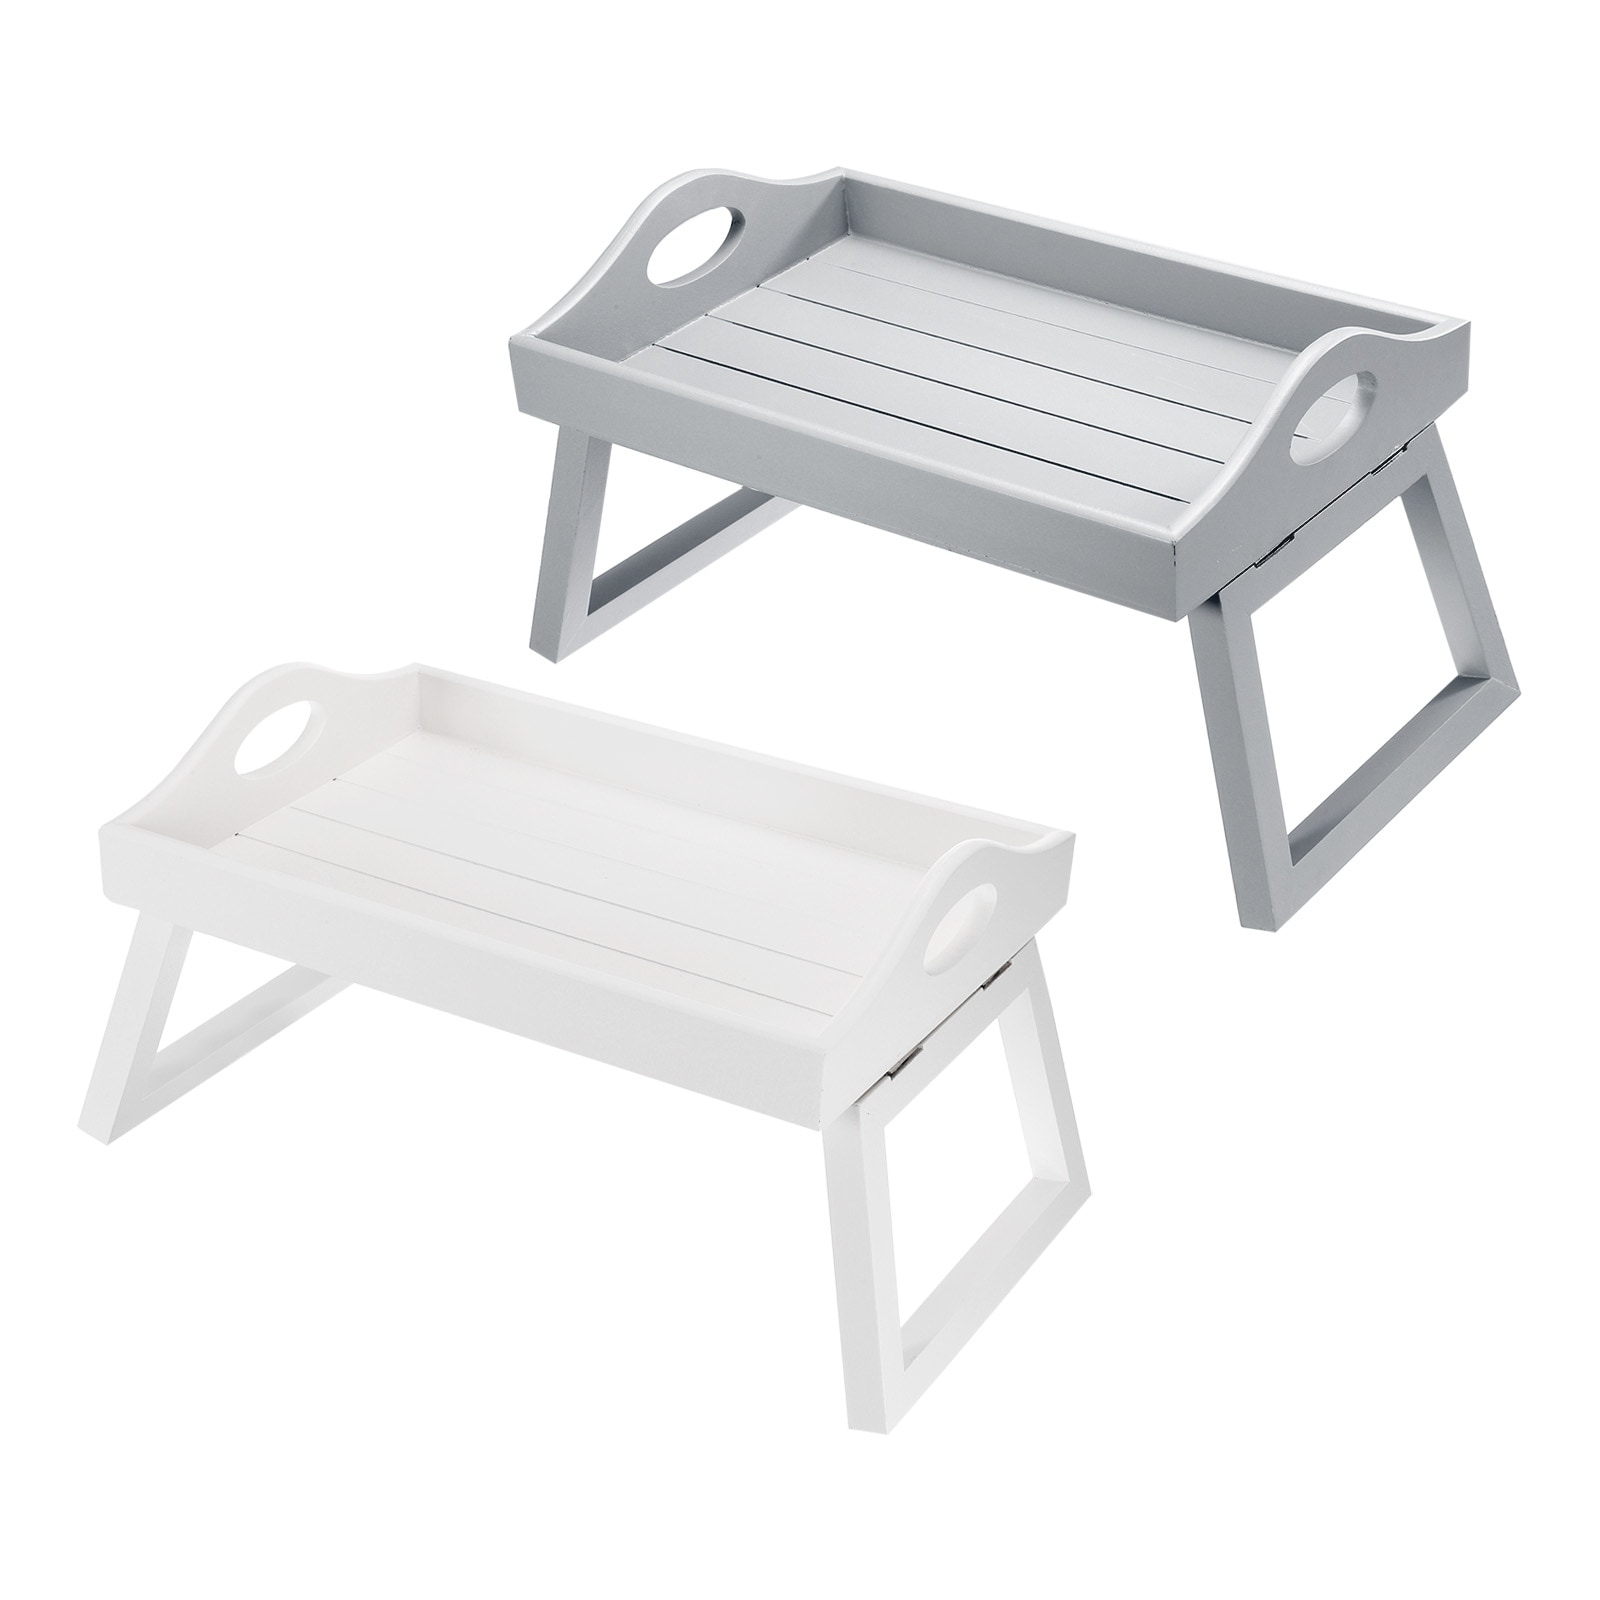 Breakfast Tray Table with Folding Legs Rectangle Serving Tray - On Sale -  Bed Bath & Beyond - 37652859